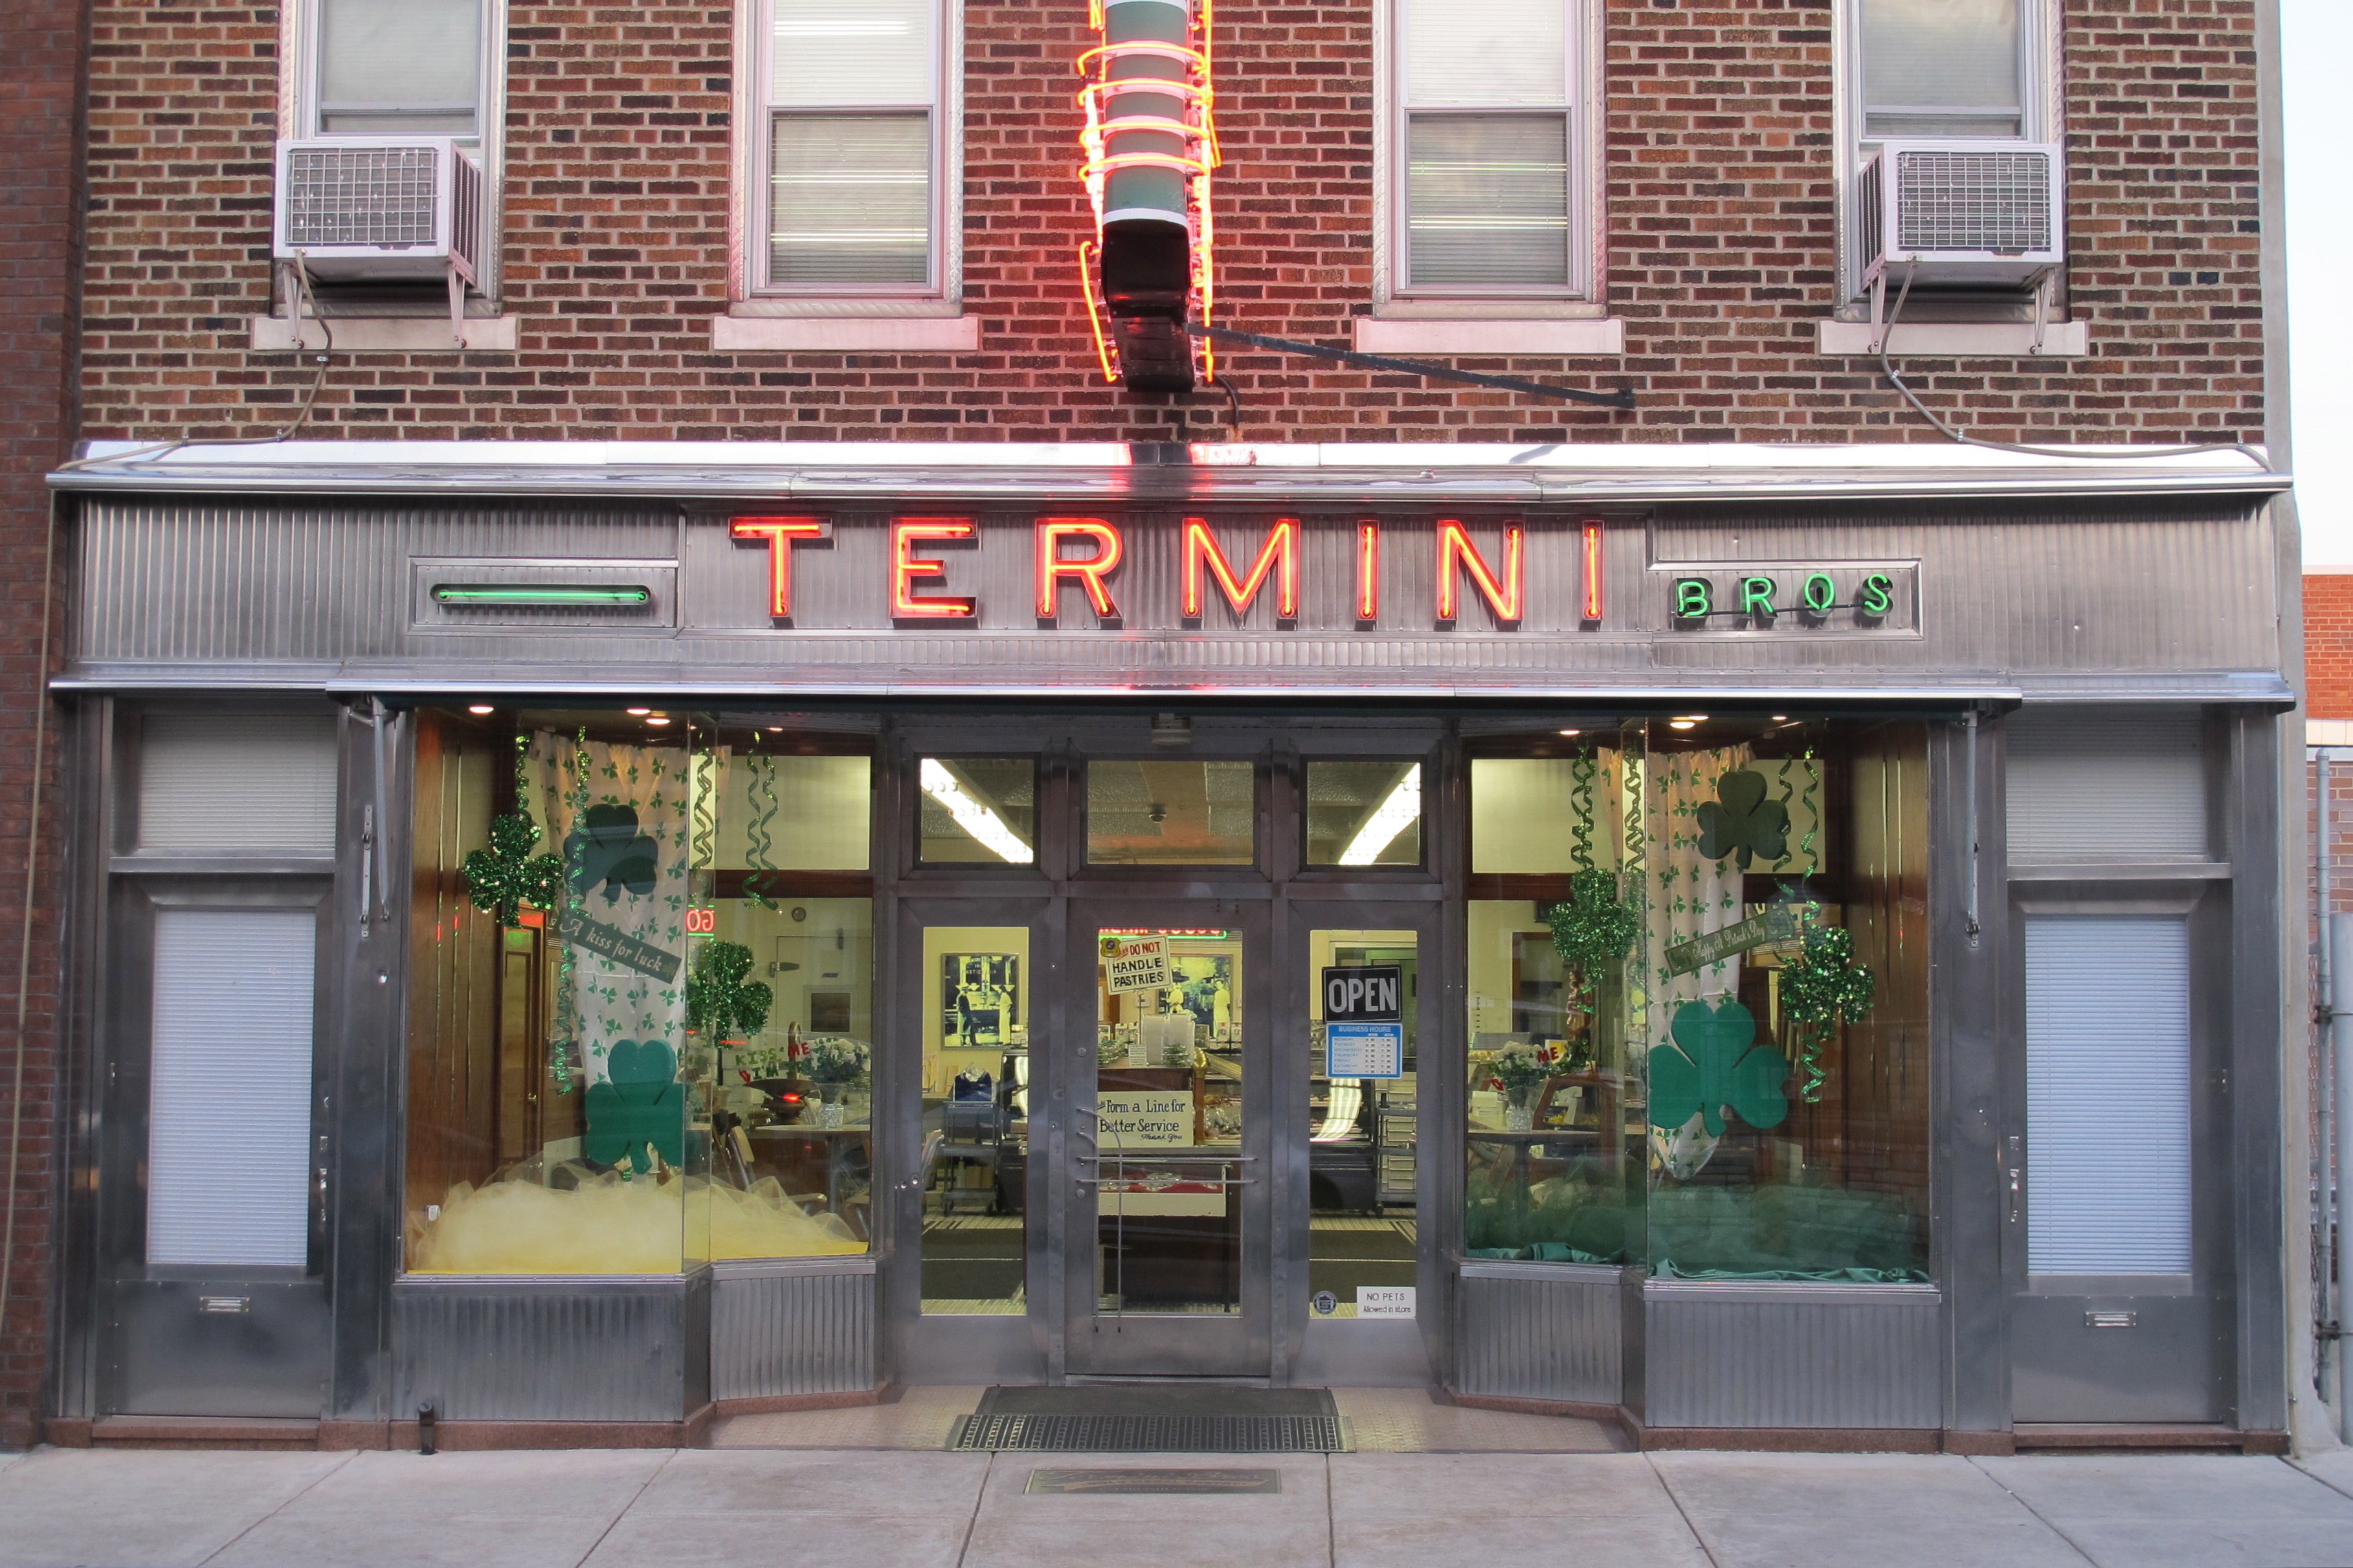 The restoration of the Termini Bros. storefront earned a Preservation Achievement Award.